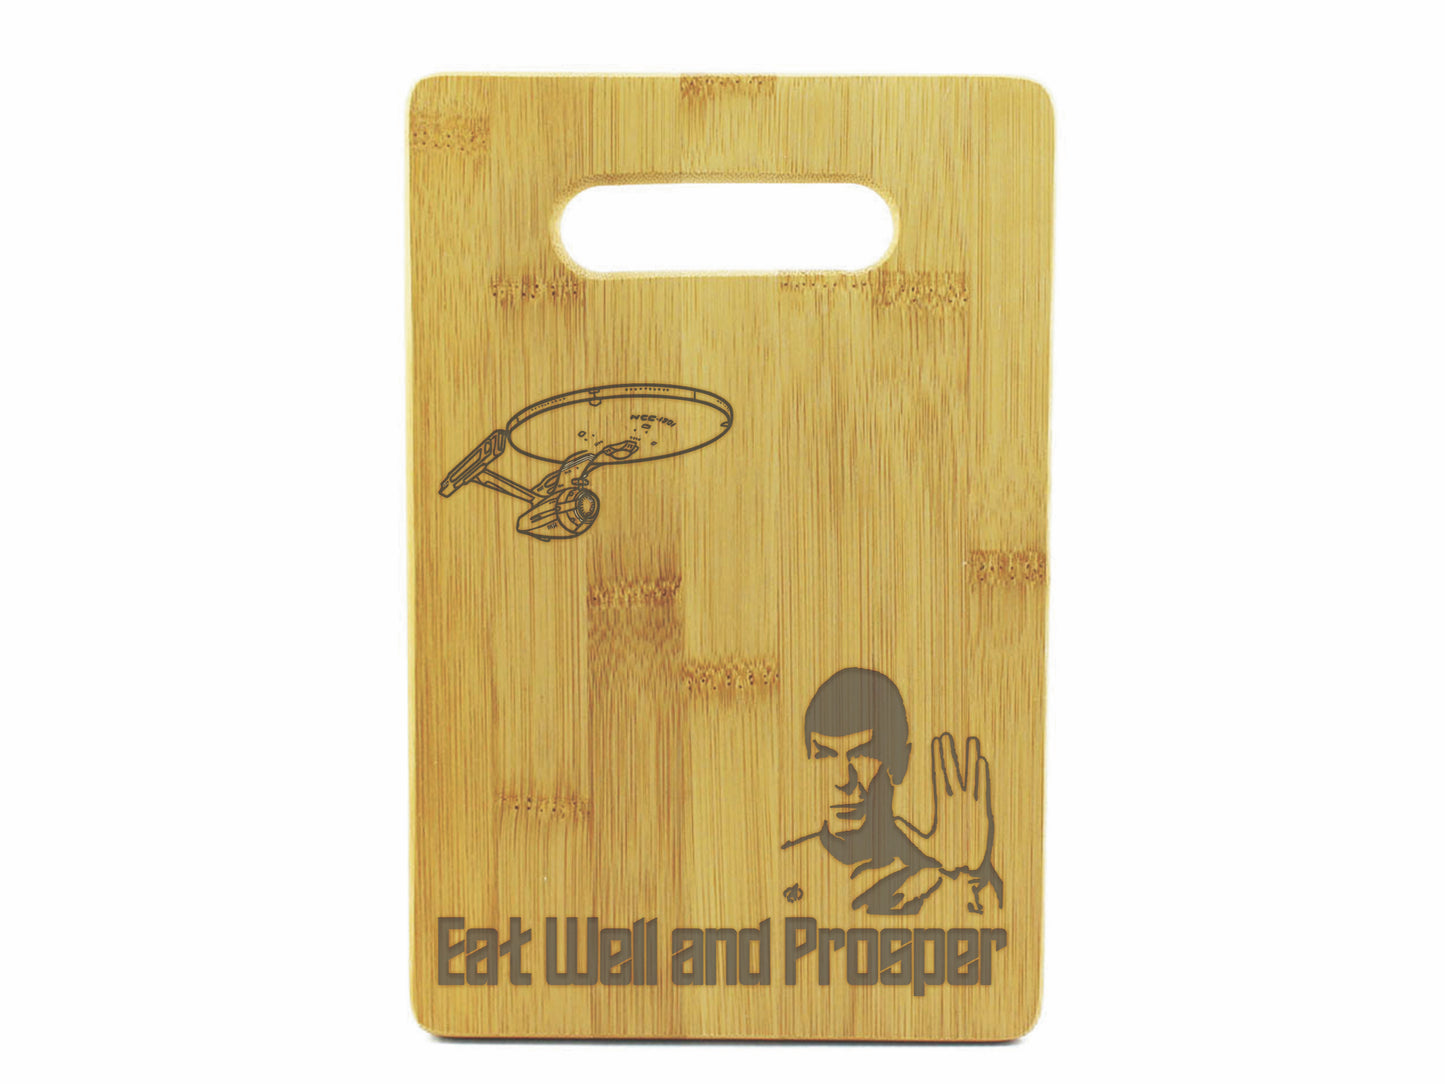 Star Trek Bamboo Cutting Boards | Spock | Eat Well and Prosper Wood Cutting Boards | Different Styles Available